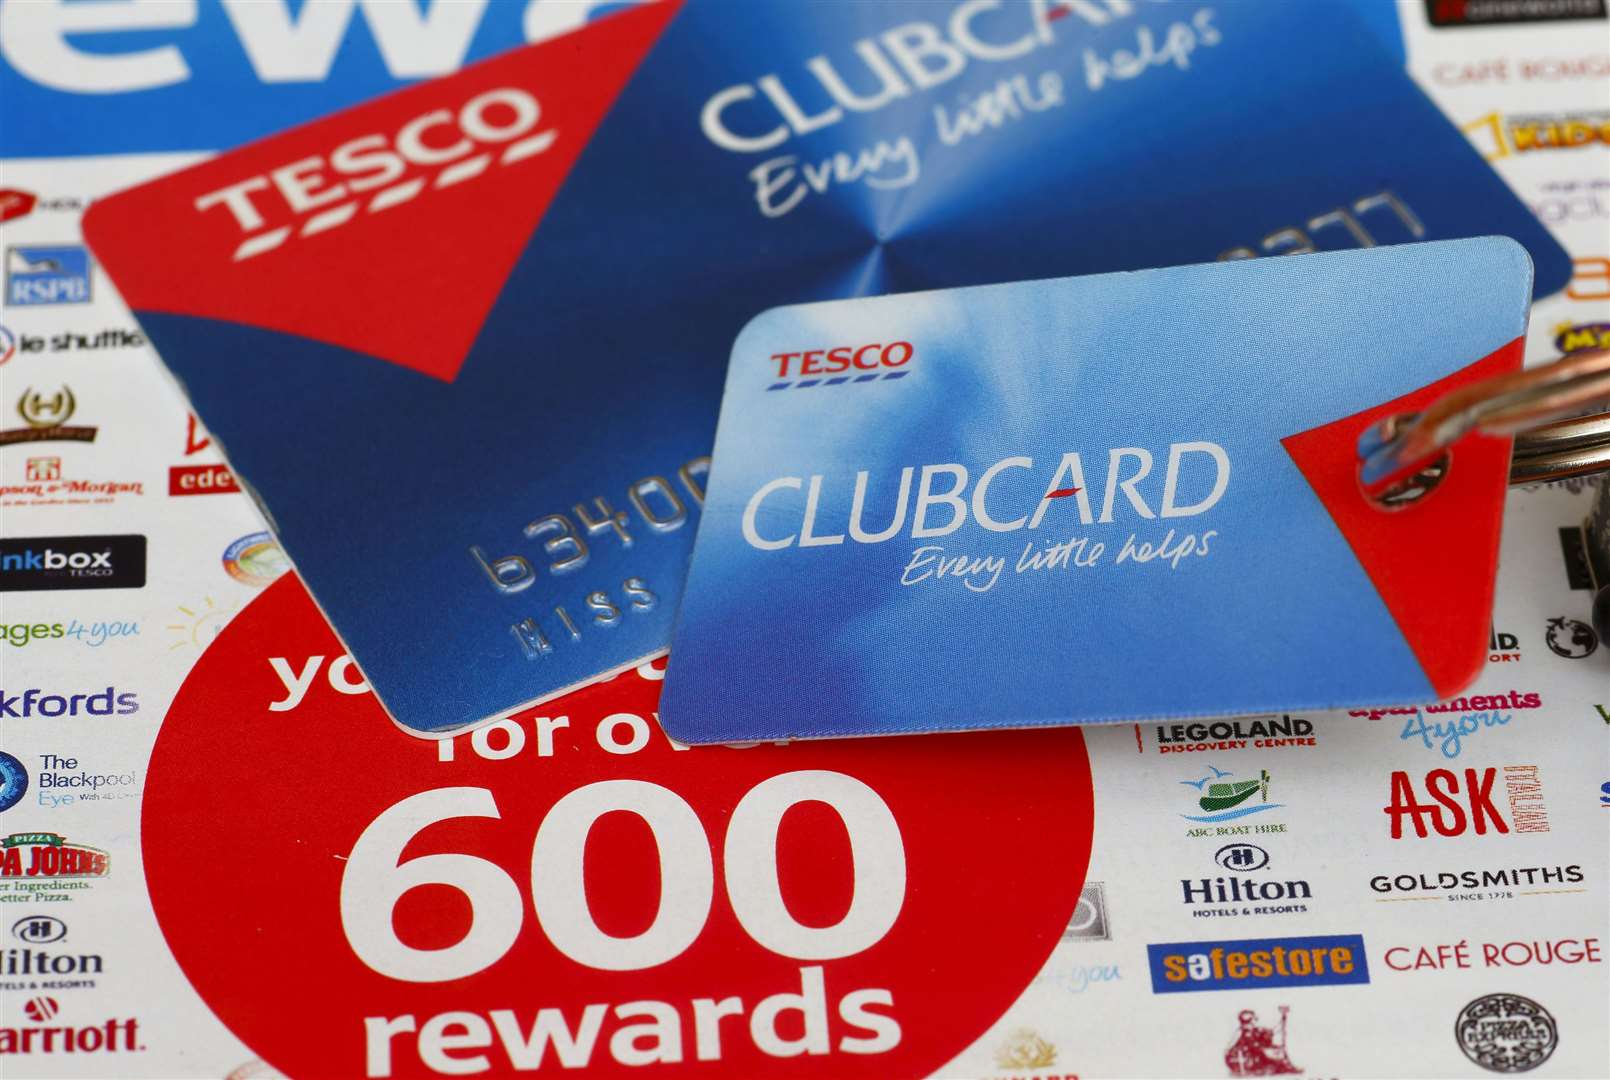 Tesco is embroiled in a High Court fight over a yellow circle logo it uses for Clubcard promotions which Lidl claims is a trademark and copyright infringement (Chris Ison/PA)